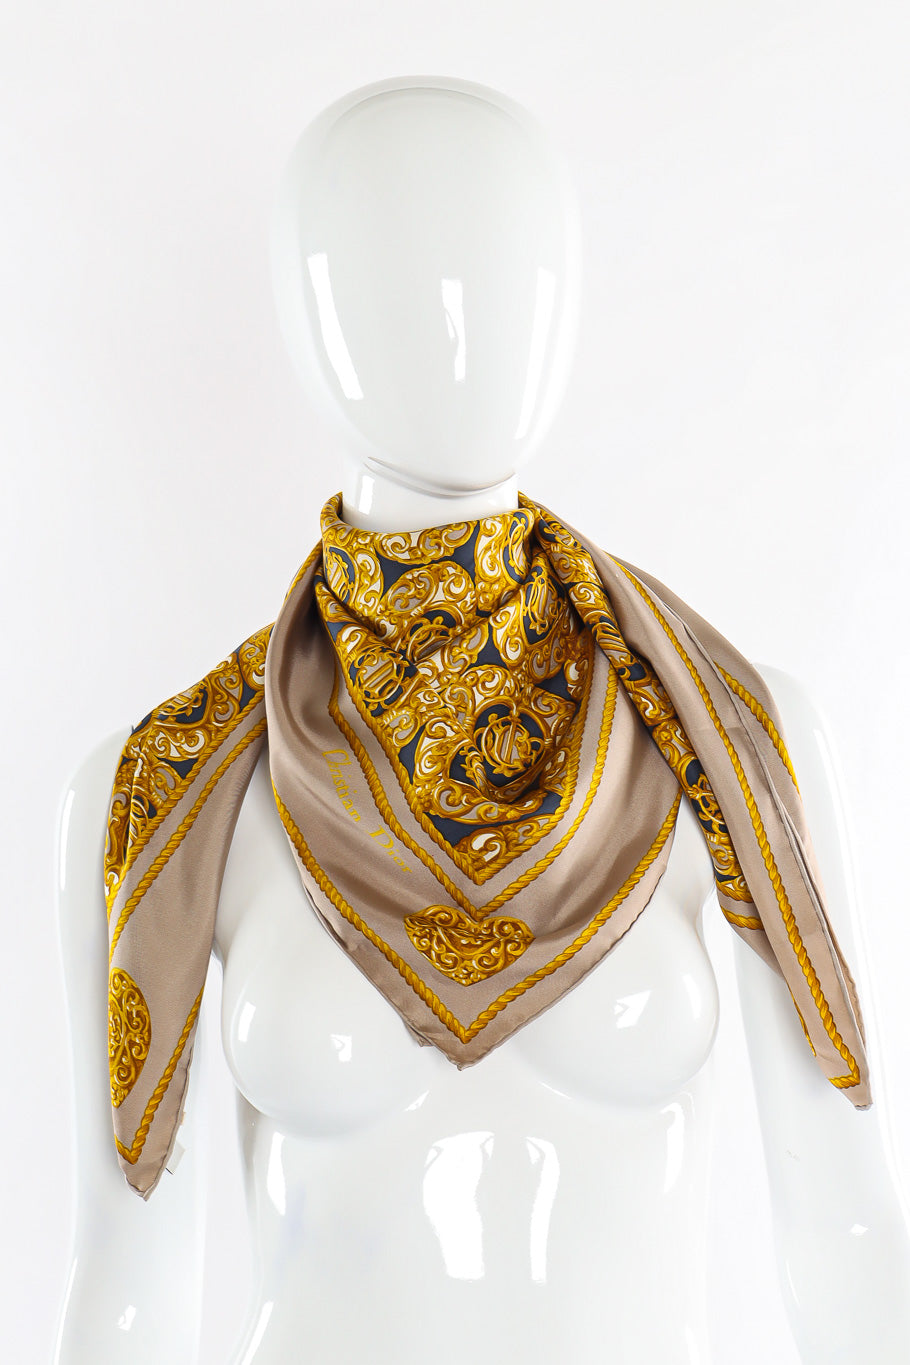 Brocade heart print scarf by Christian Dior on mannequin @recessla